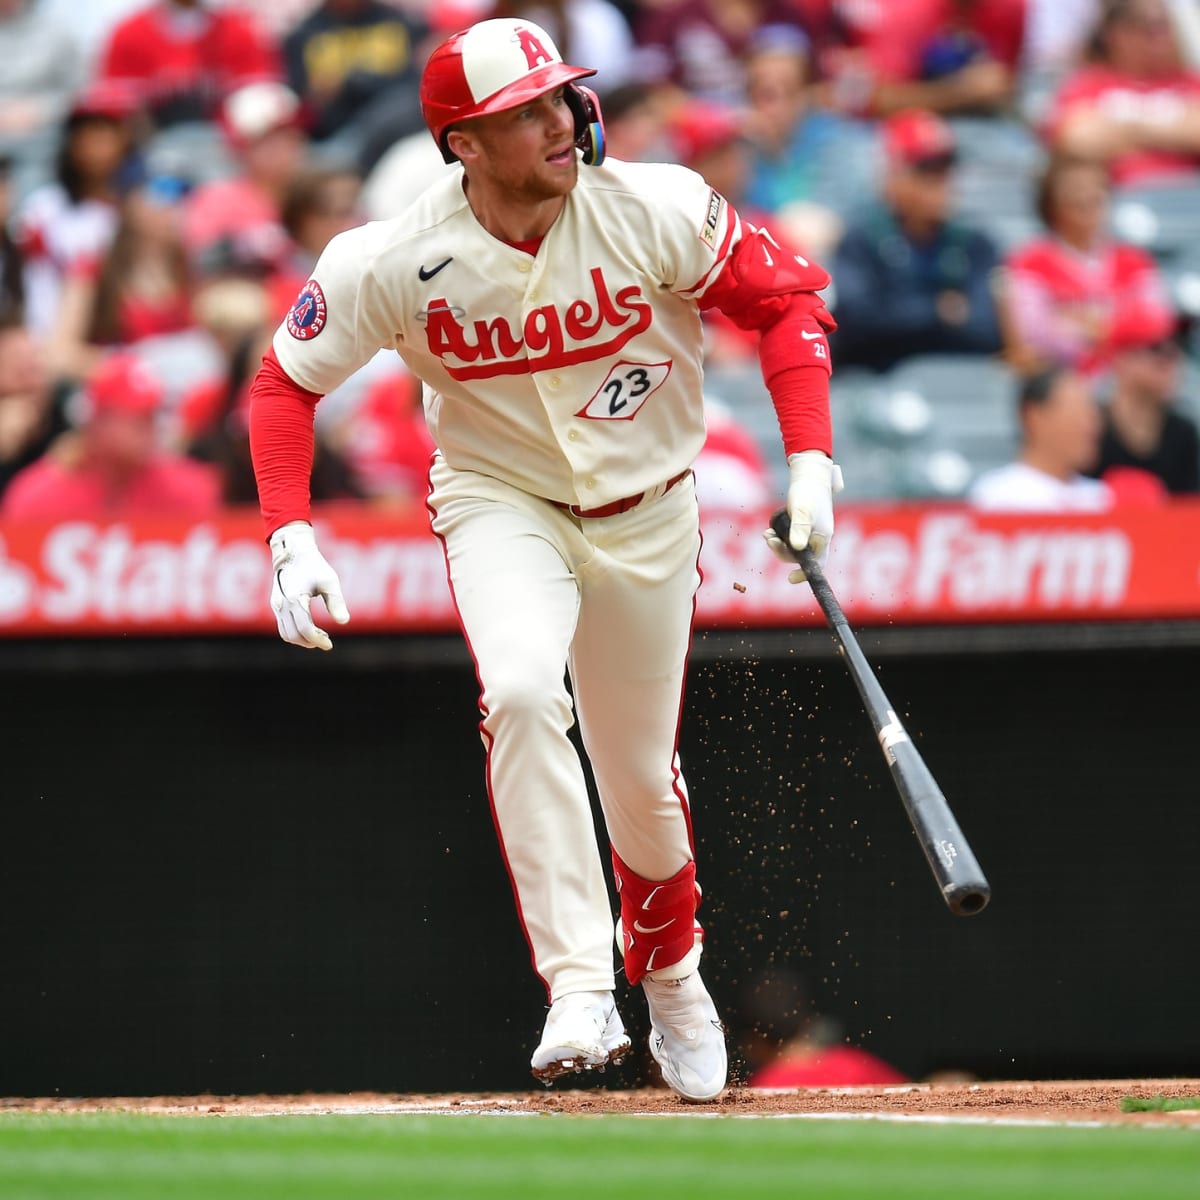 Angels News Halos Utility Player Received One-Game Suspension, Appealed and Will Play Tonight